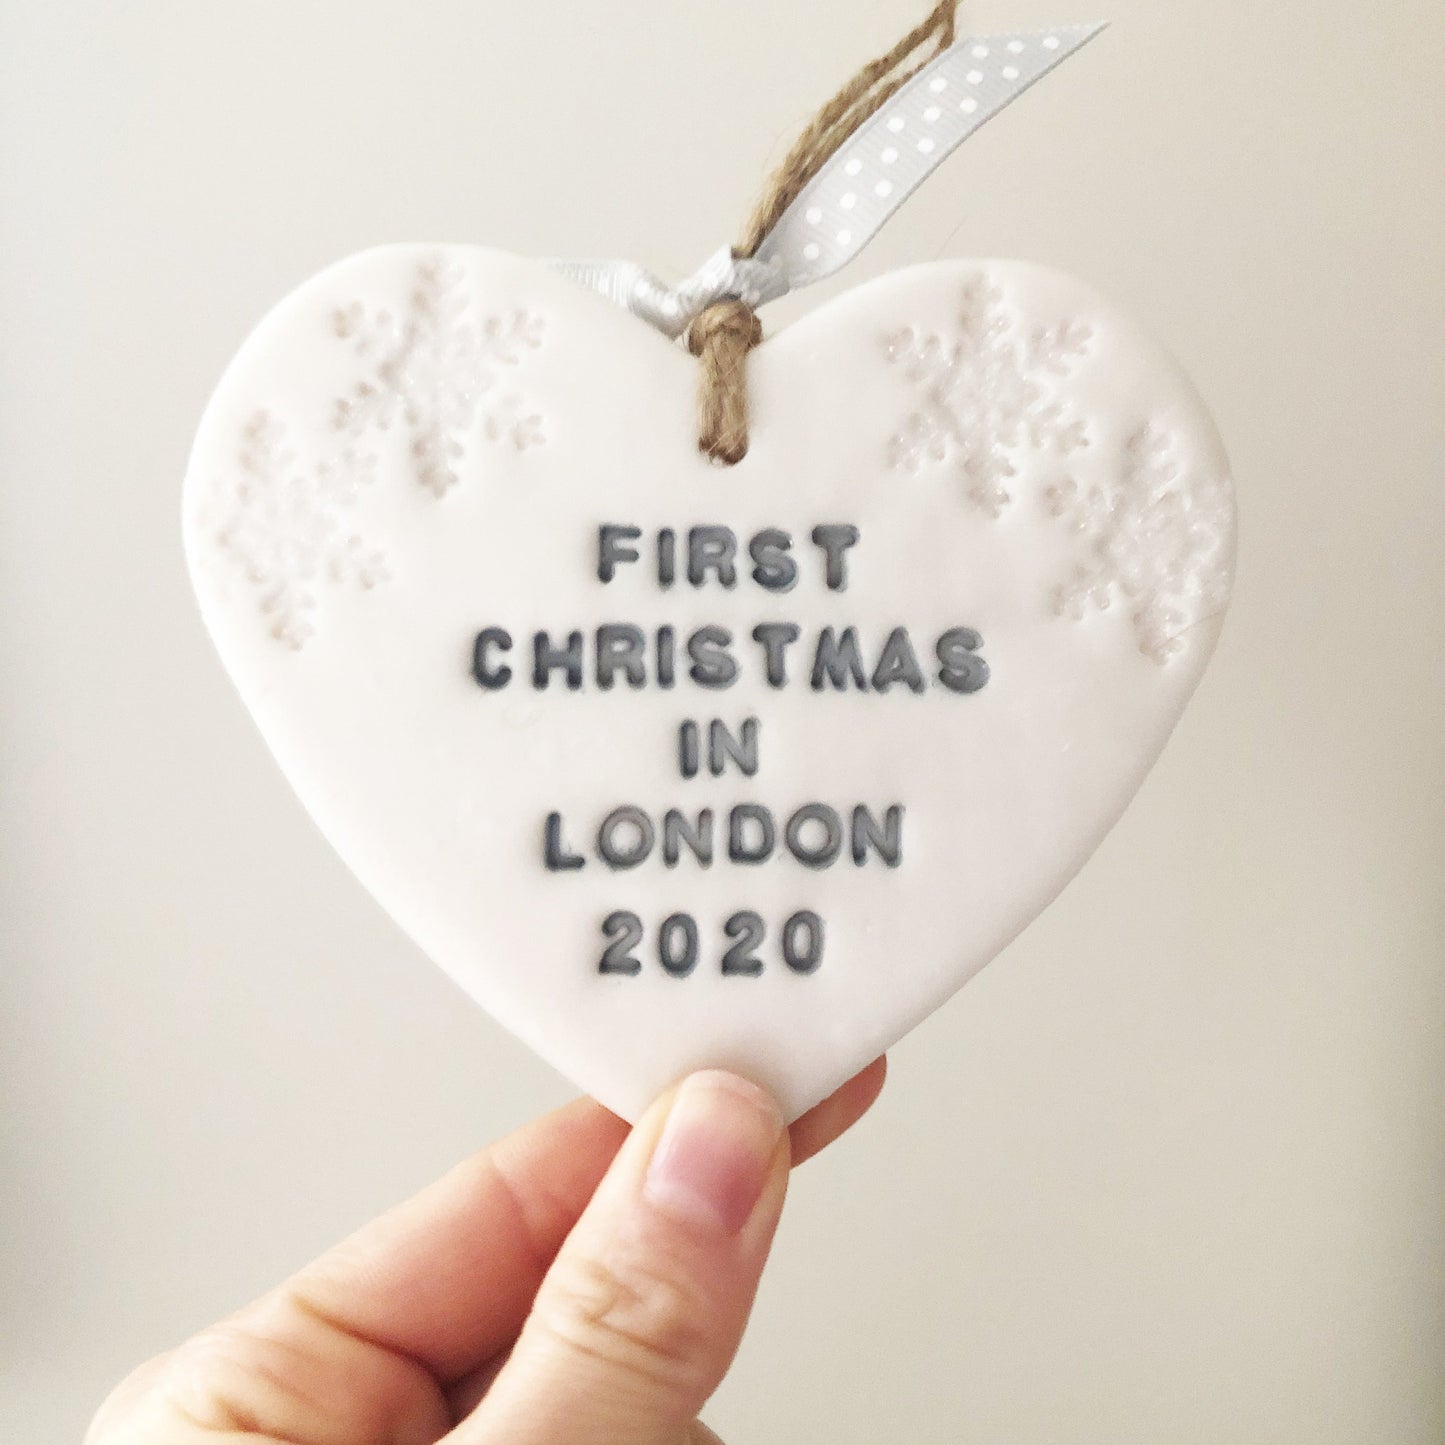 Personalised our first Christmas heart ornament, pearlised white clay with FIRST CHRISTMAS IN LONDON 2020 painted grey, decorated with 2 iridescent glitter snowflakes on either side of the top of the heart